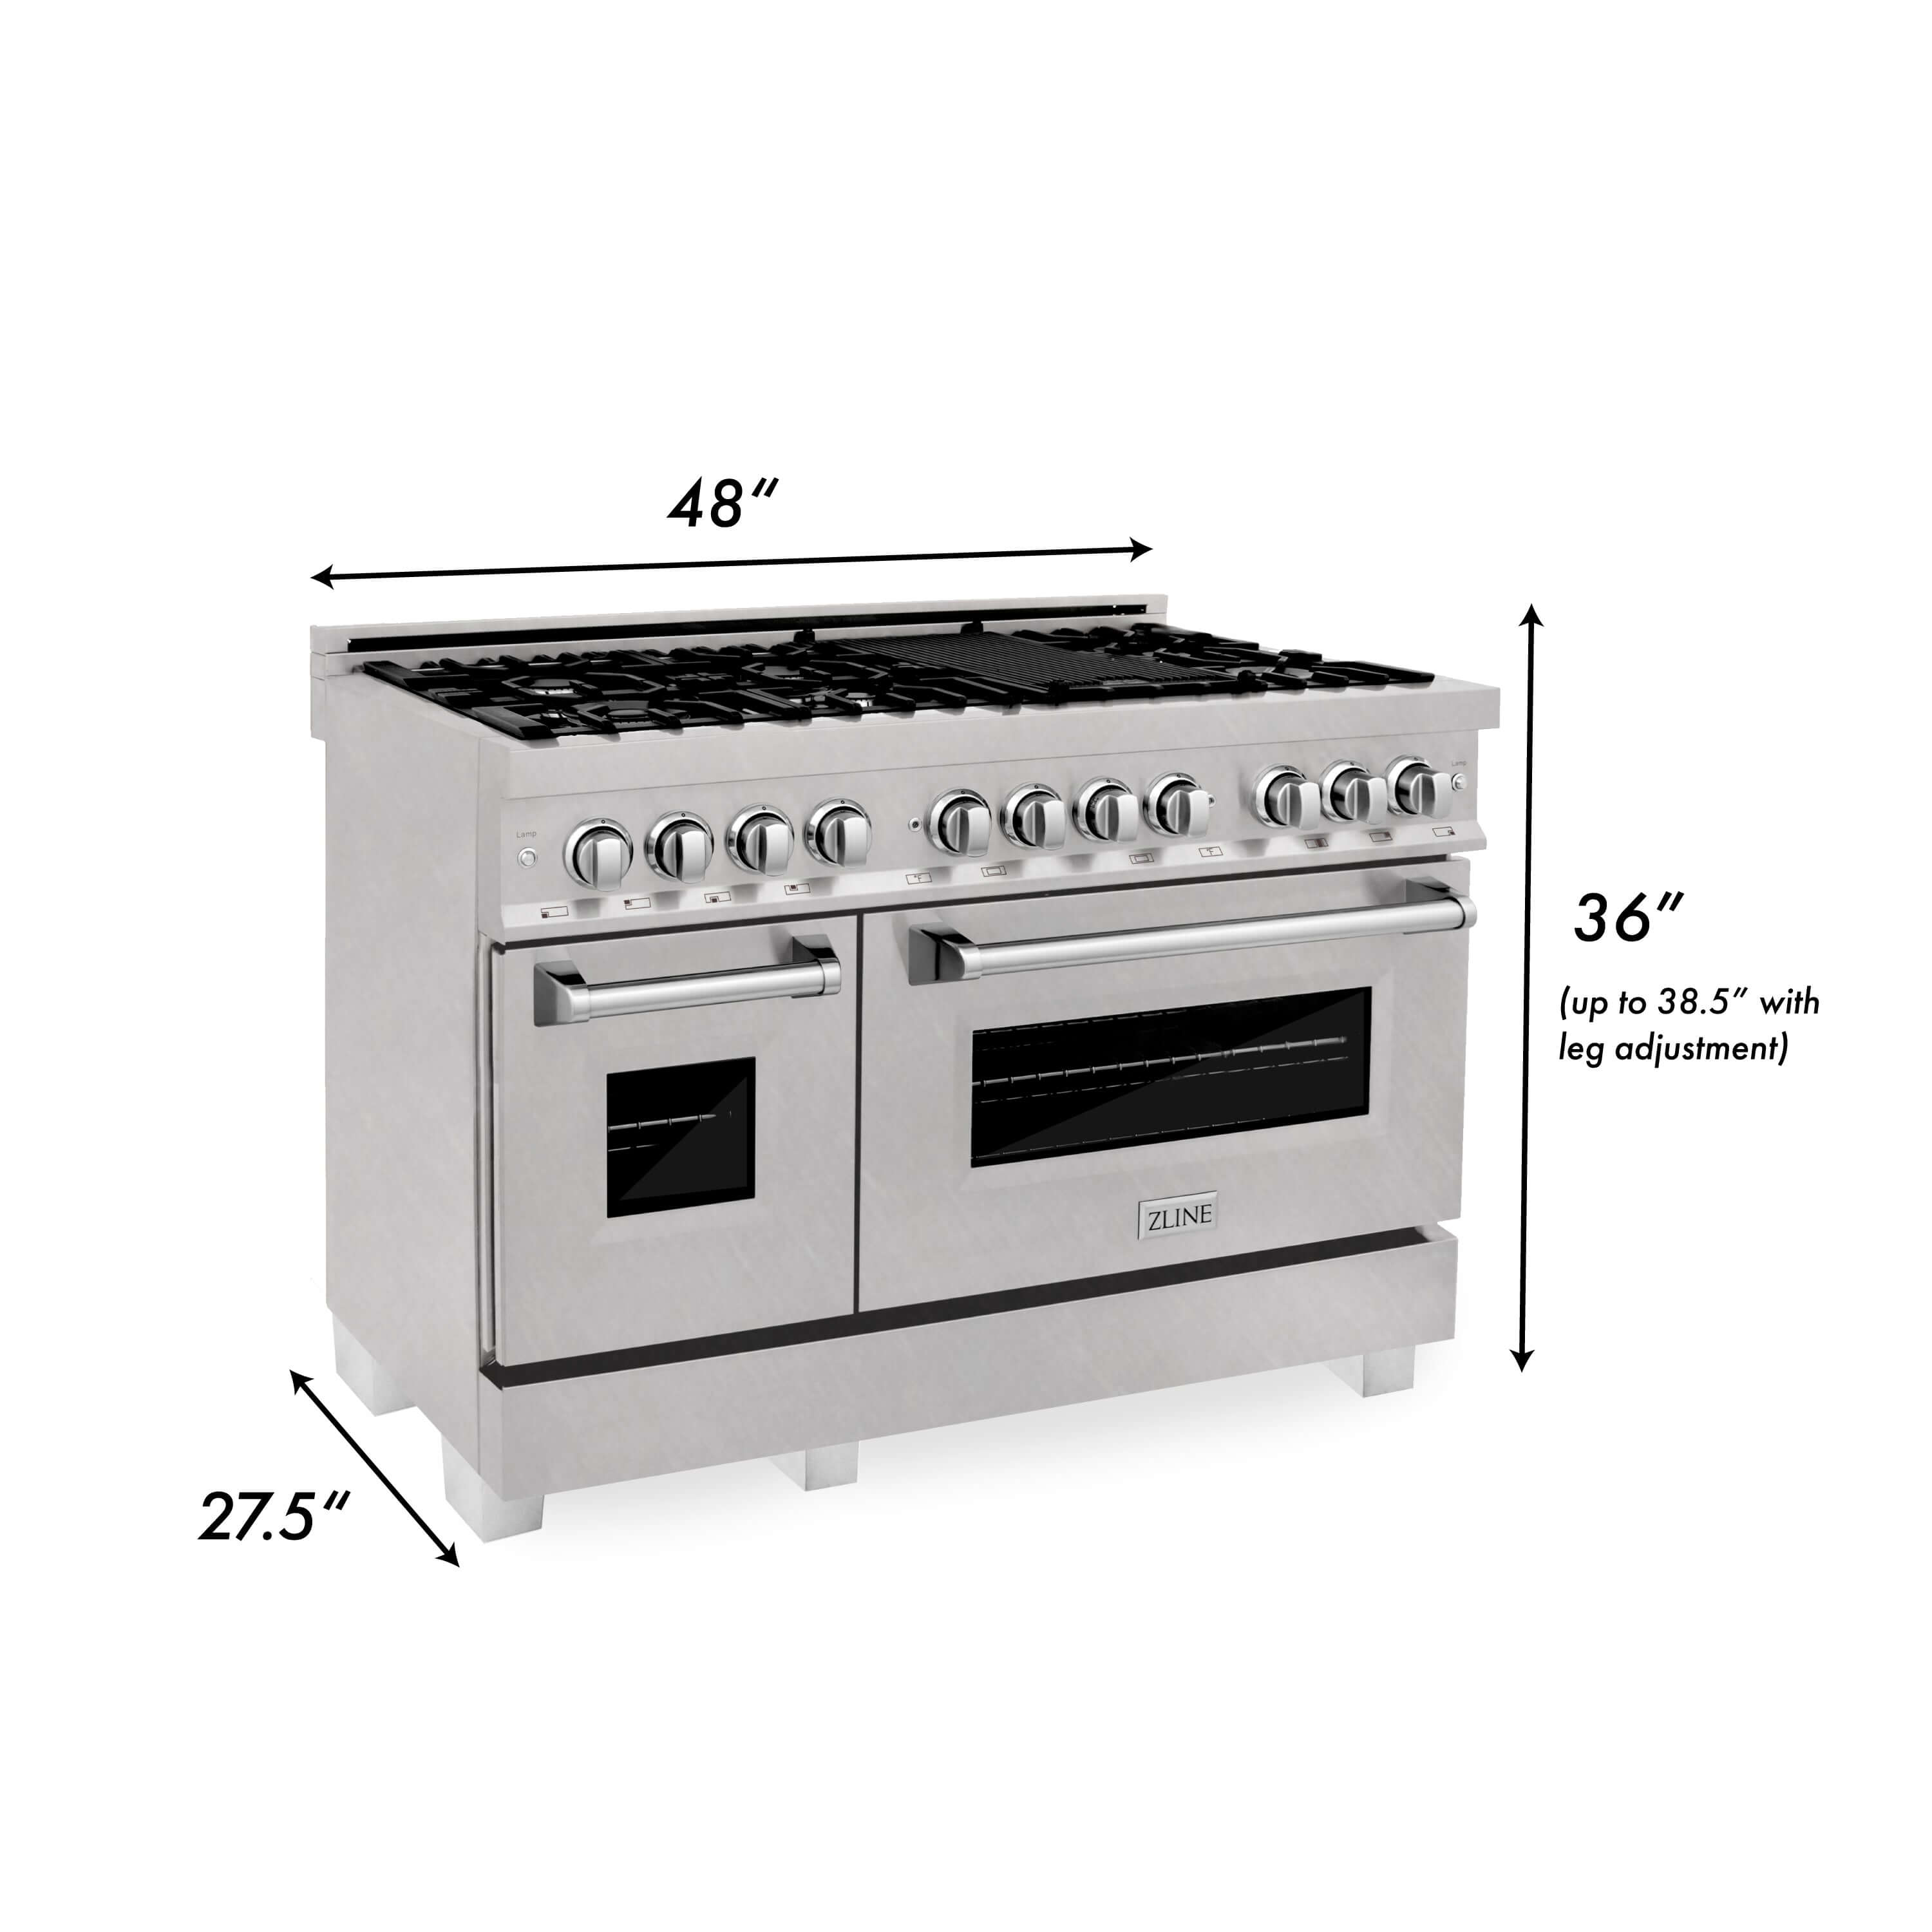 ZLINE 48 in. Kitchen Package with DuraSnow® Stainless Steel Dual Fuel Range, Ducted Vent Range Hood and Tall Tub Dishwasher (3KP-RASRH48-DWV) dimensional diagram with measurements.